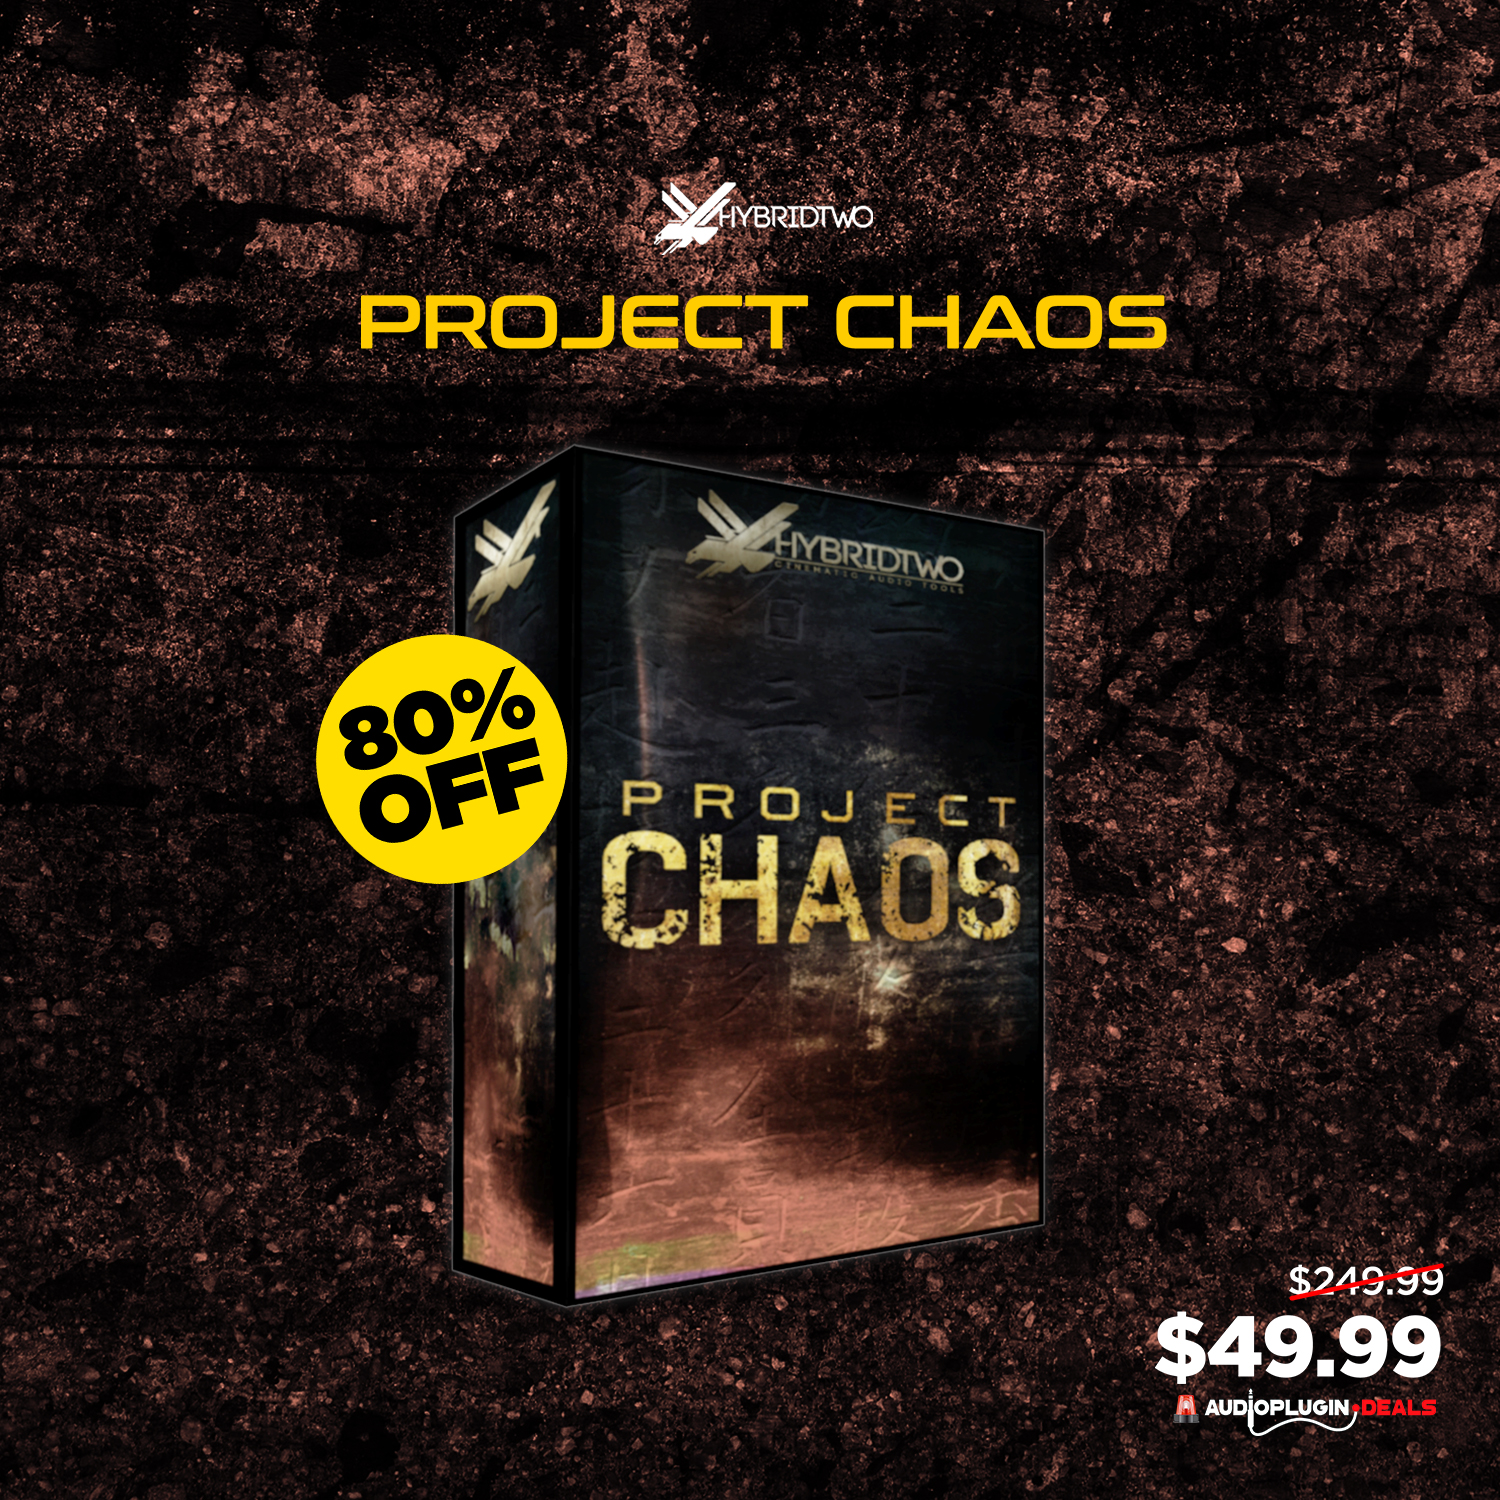 project-chaos-hybridtwo